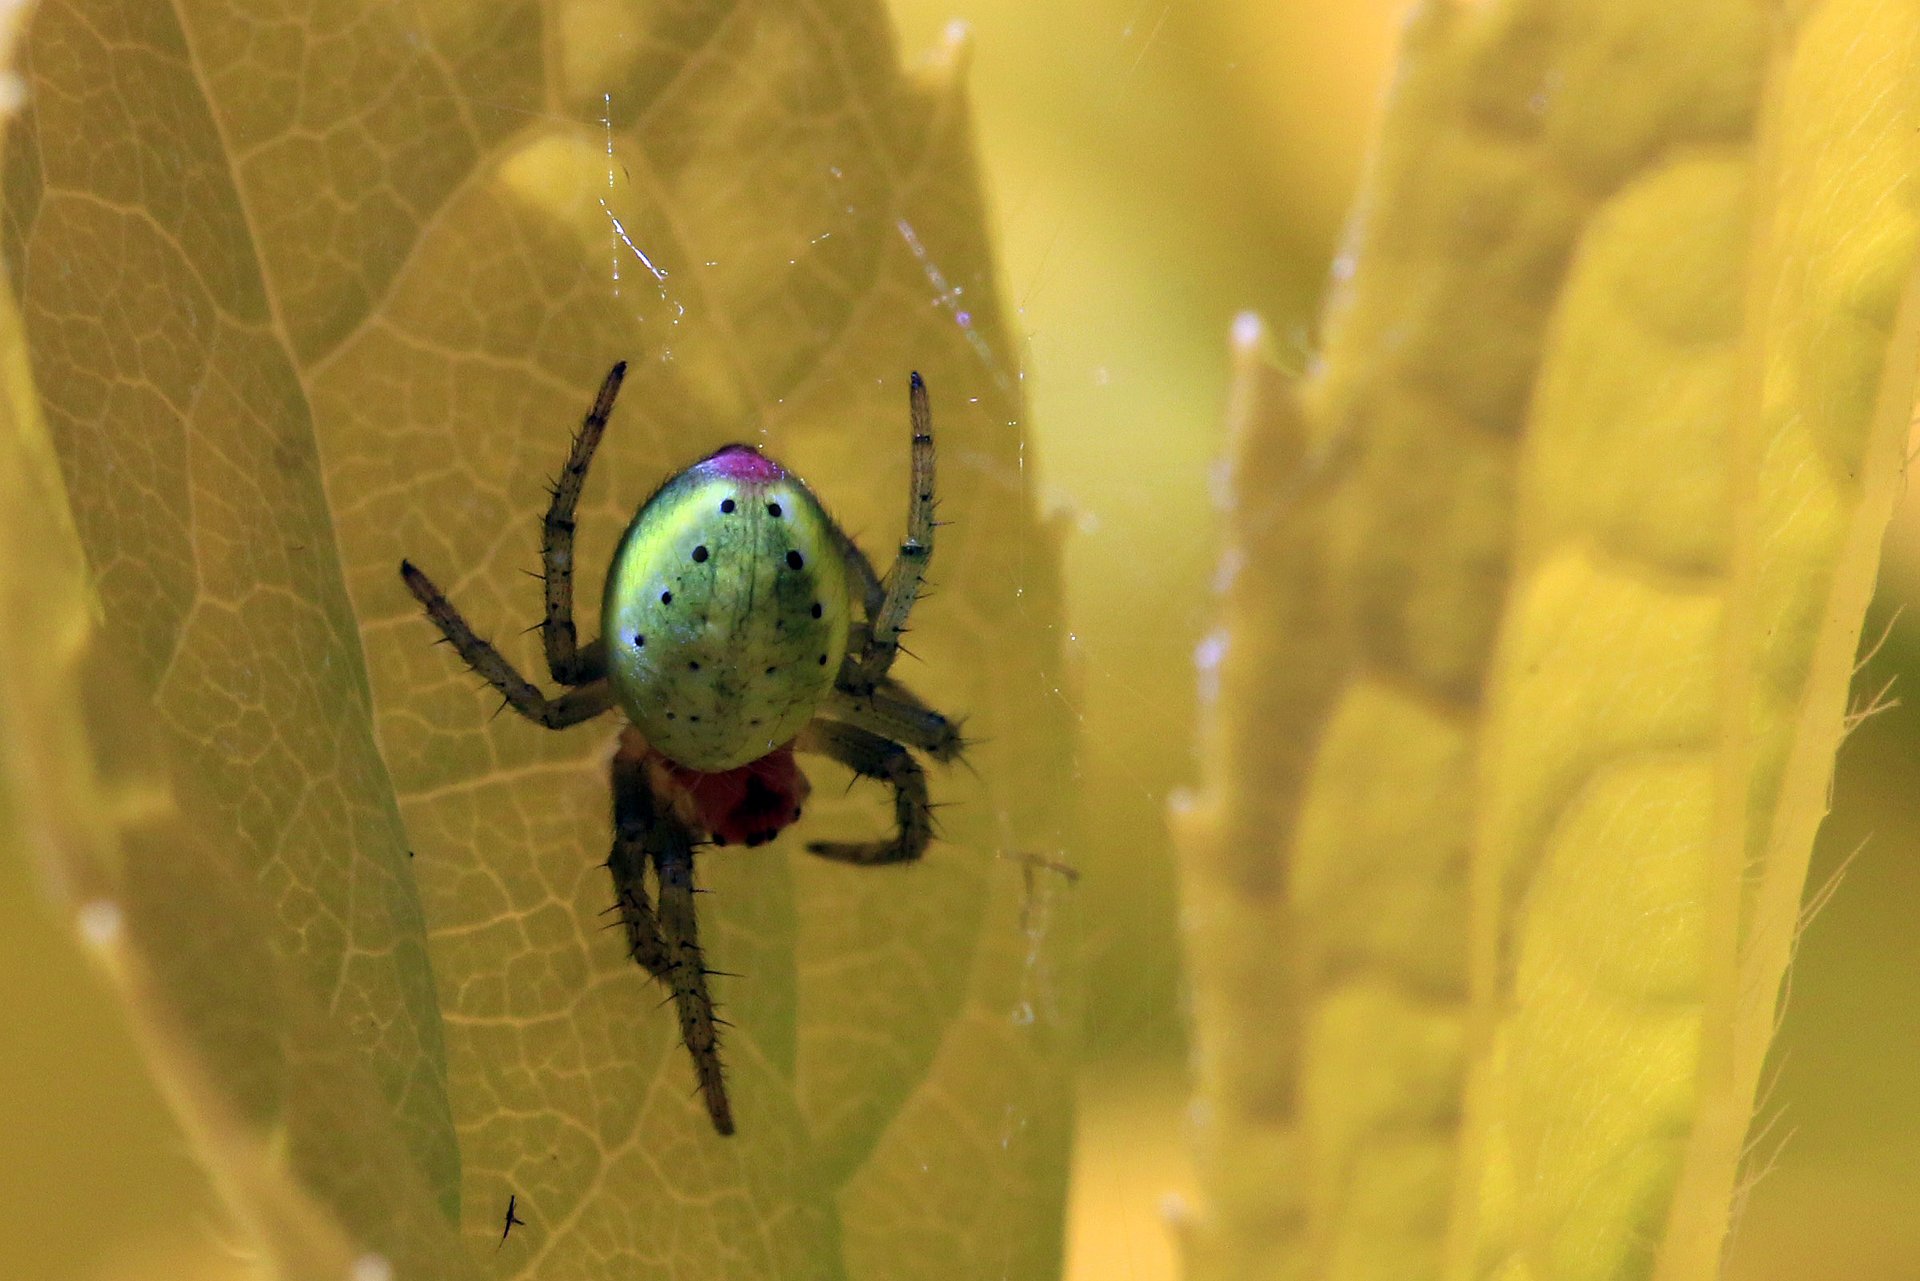 The pumpkin spider is one of the species observed for the study. Their name points to the yellowish-green backbones, which reminds of a pumpkin. (Foto: Charlesjsharp Sharp Photography /Creative-Commons-Lizenz CC BY-SA 3.0)